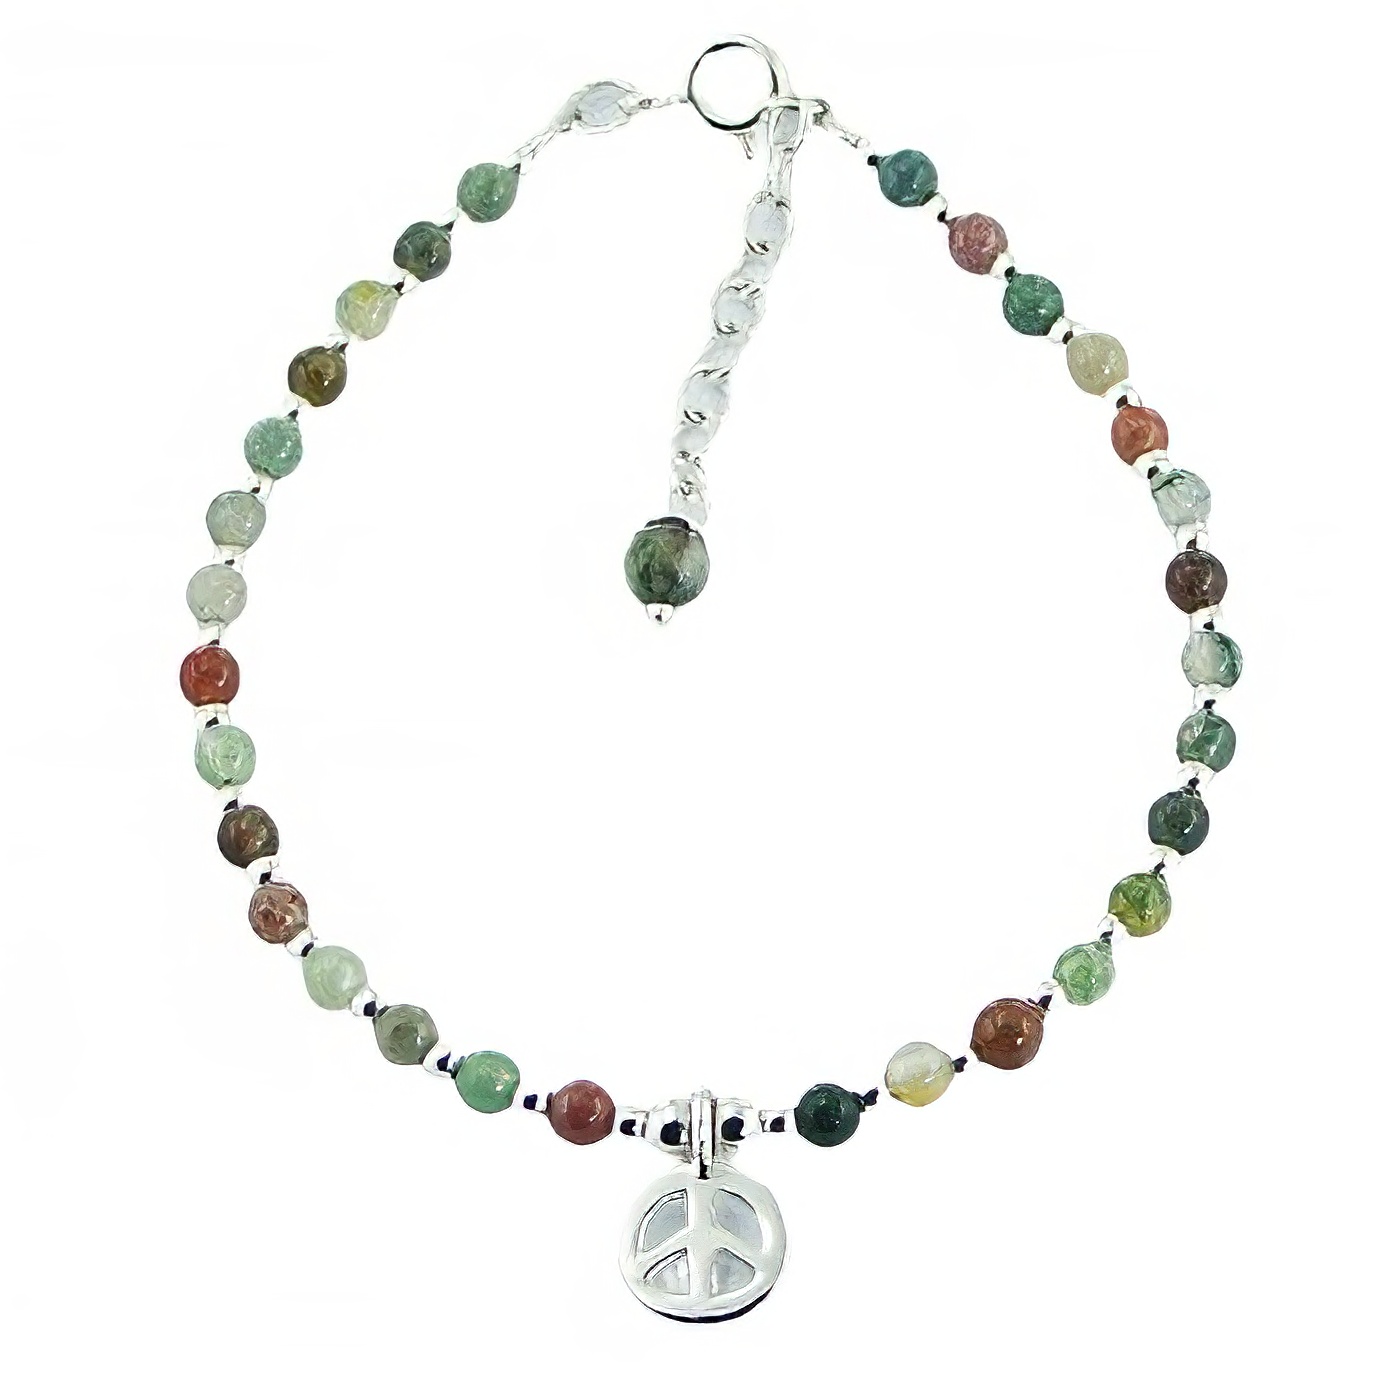 Multicolored Round Agate Bead Bracelet with Silver Peace Charm 